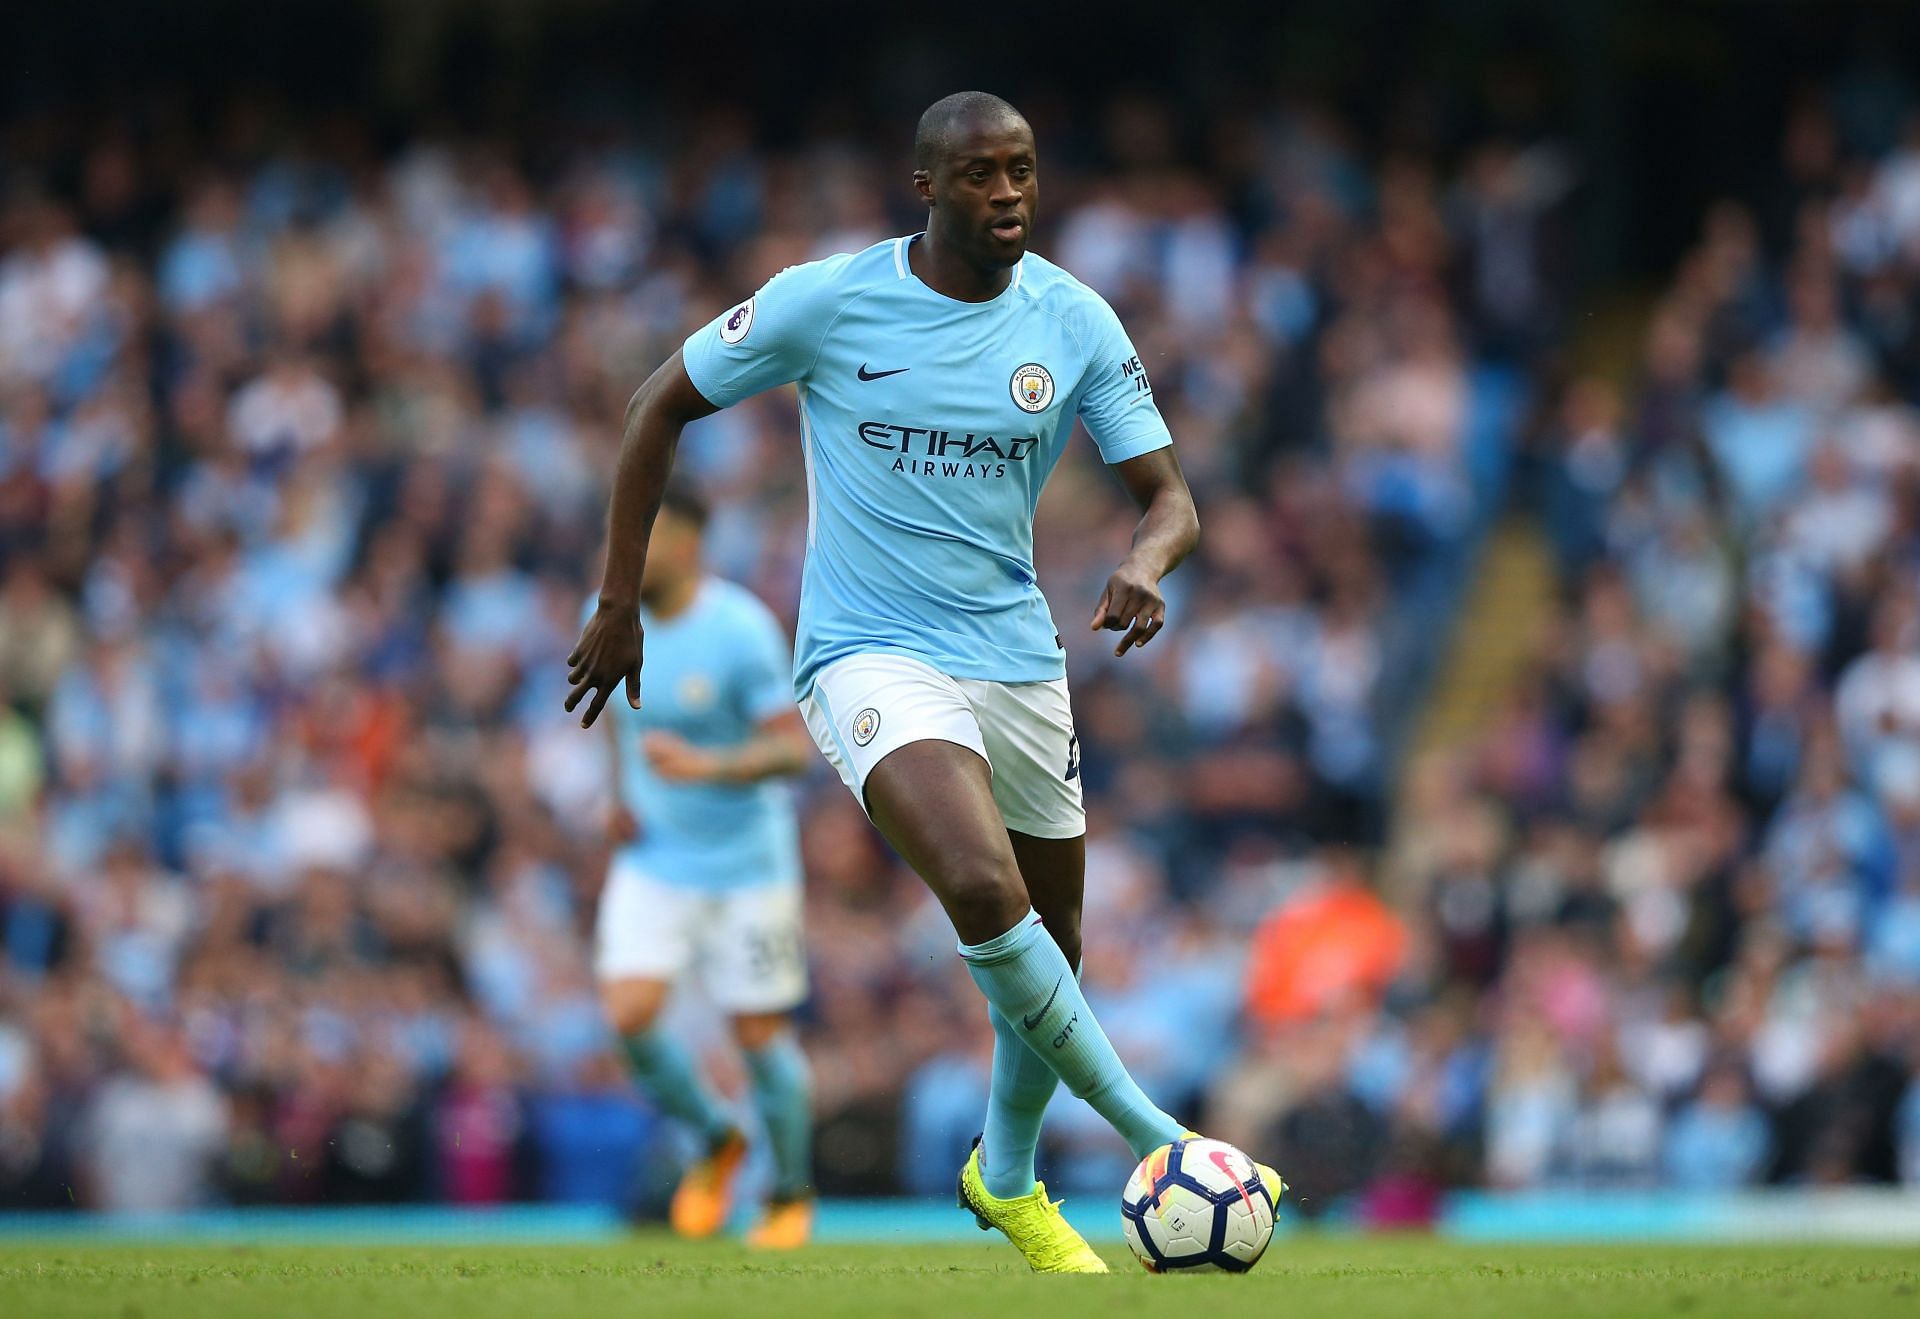 Yaya Toure had a successful Premier League stint with Manchester City.